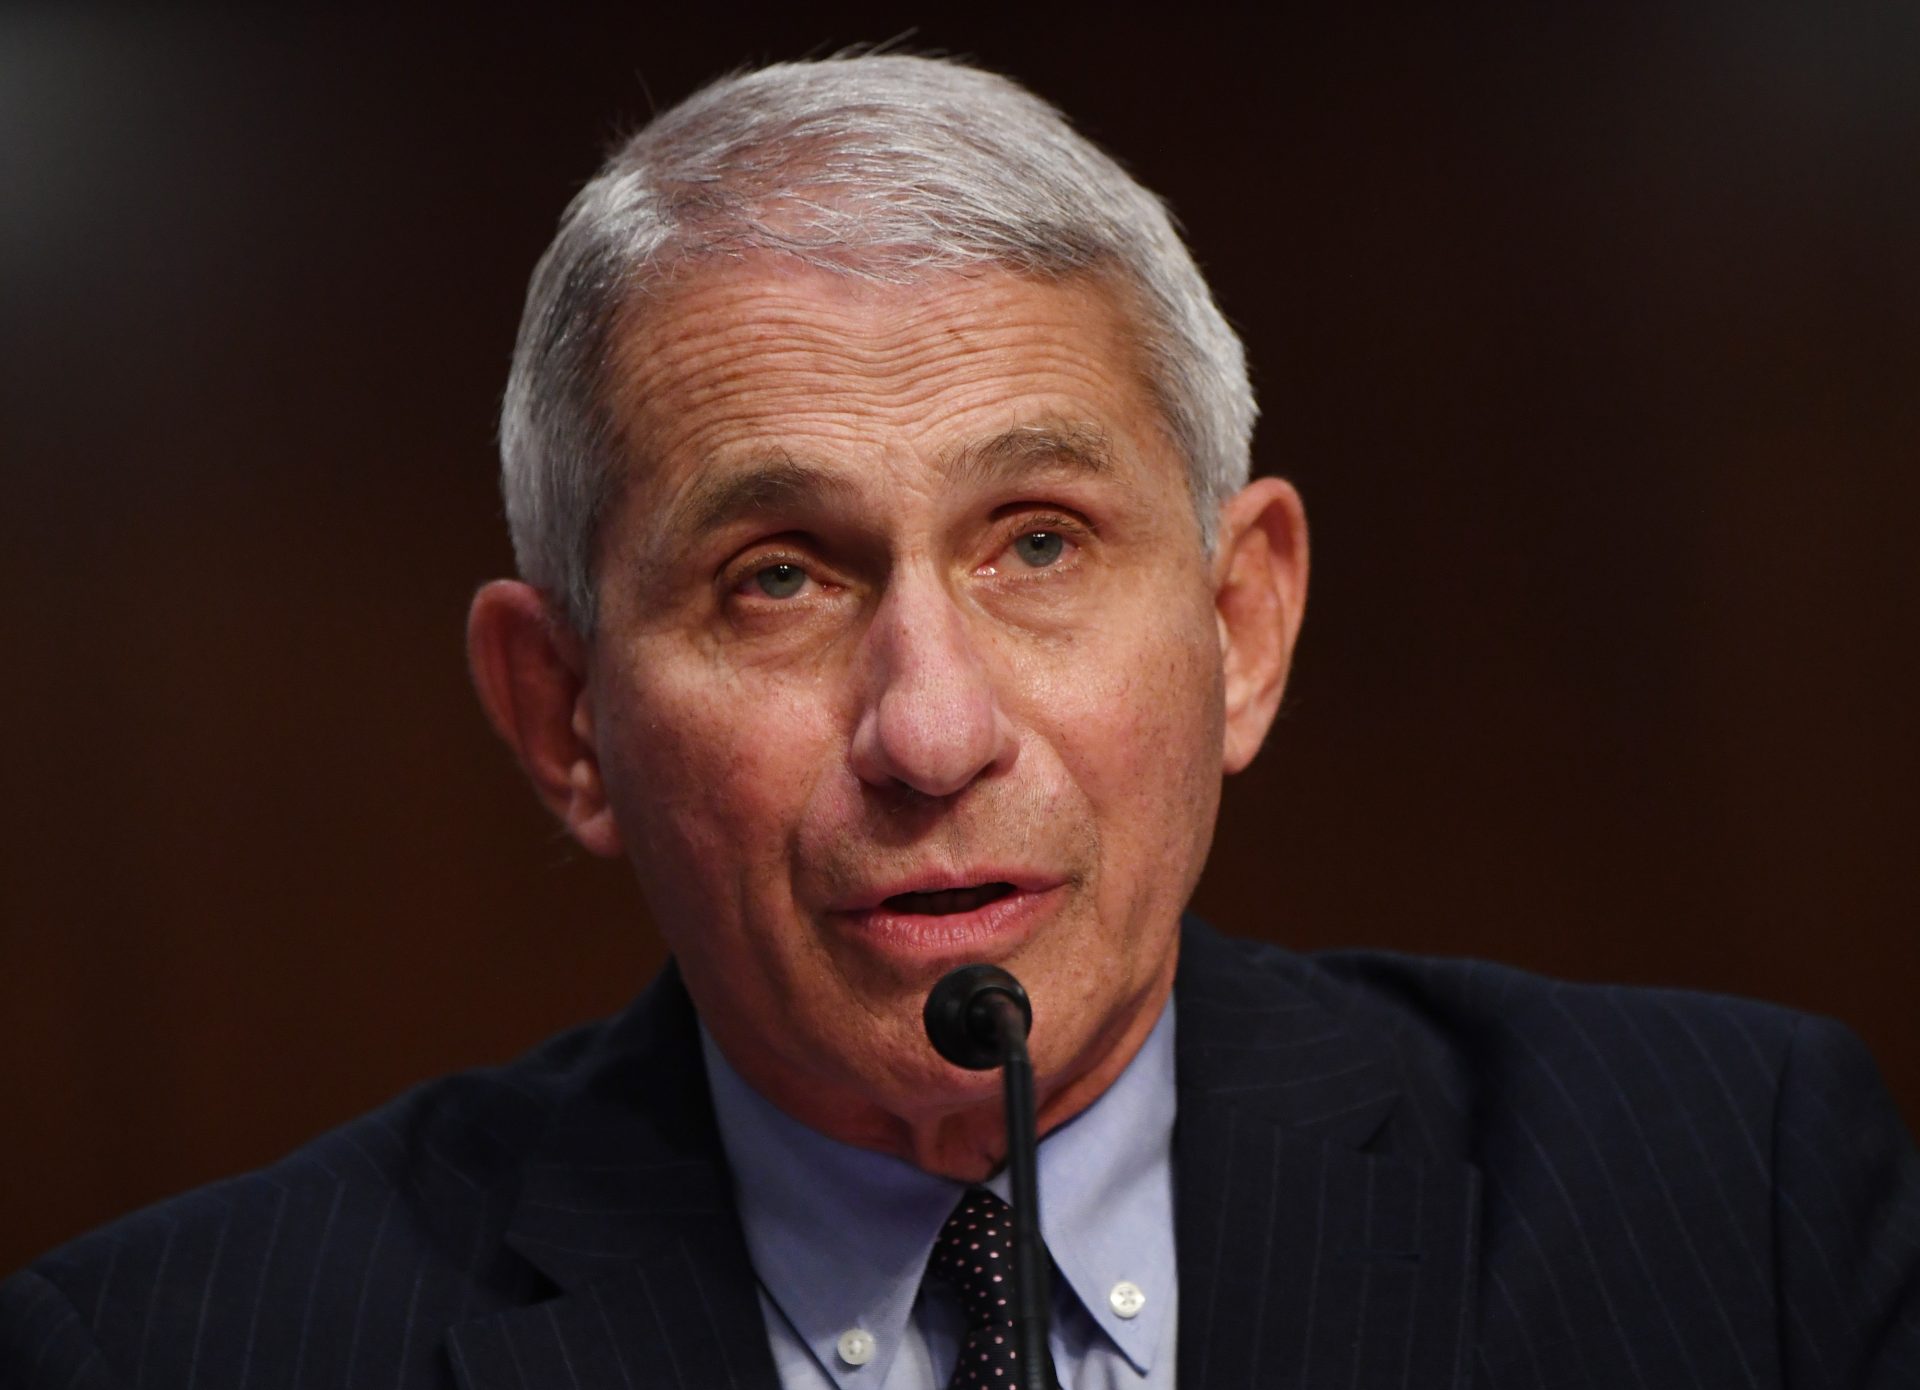 Dr. Fauci To Resign From Federal Government Roles After 38 Years